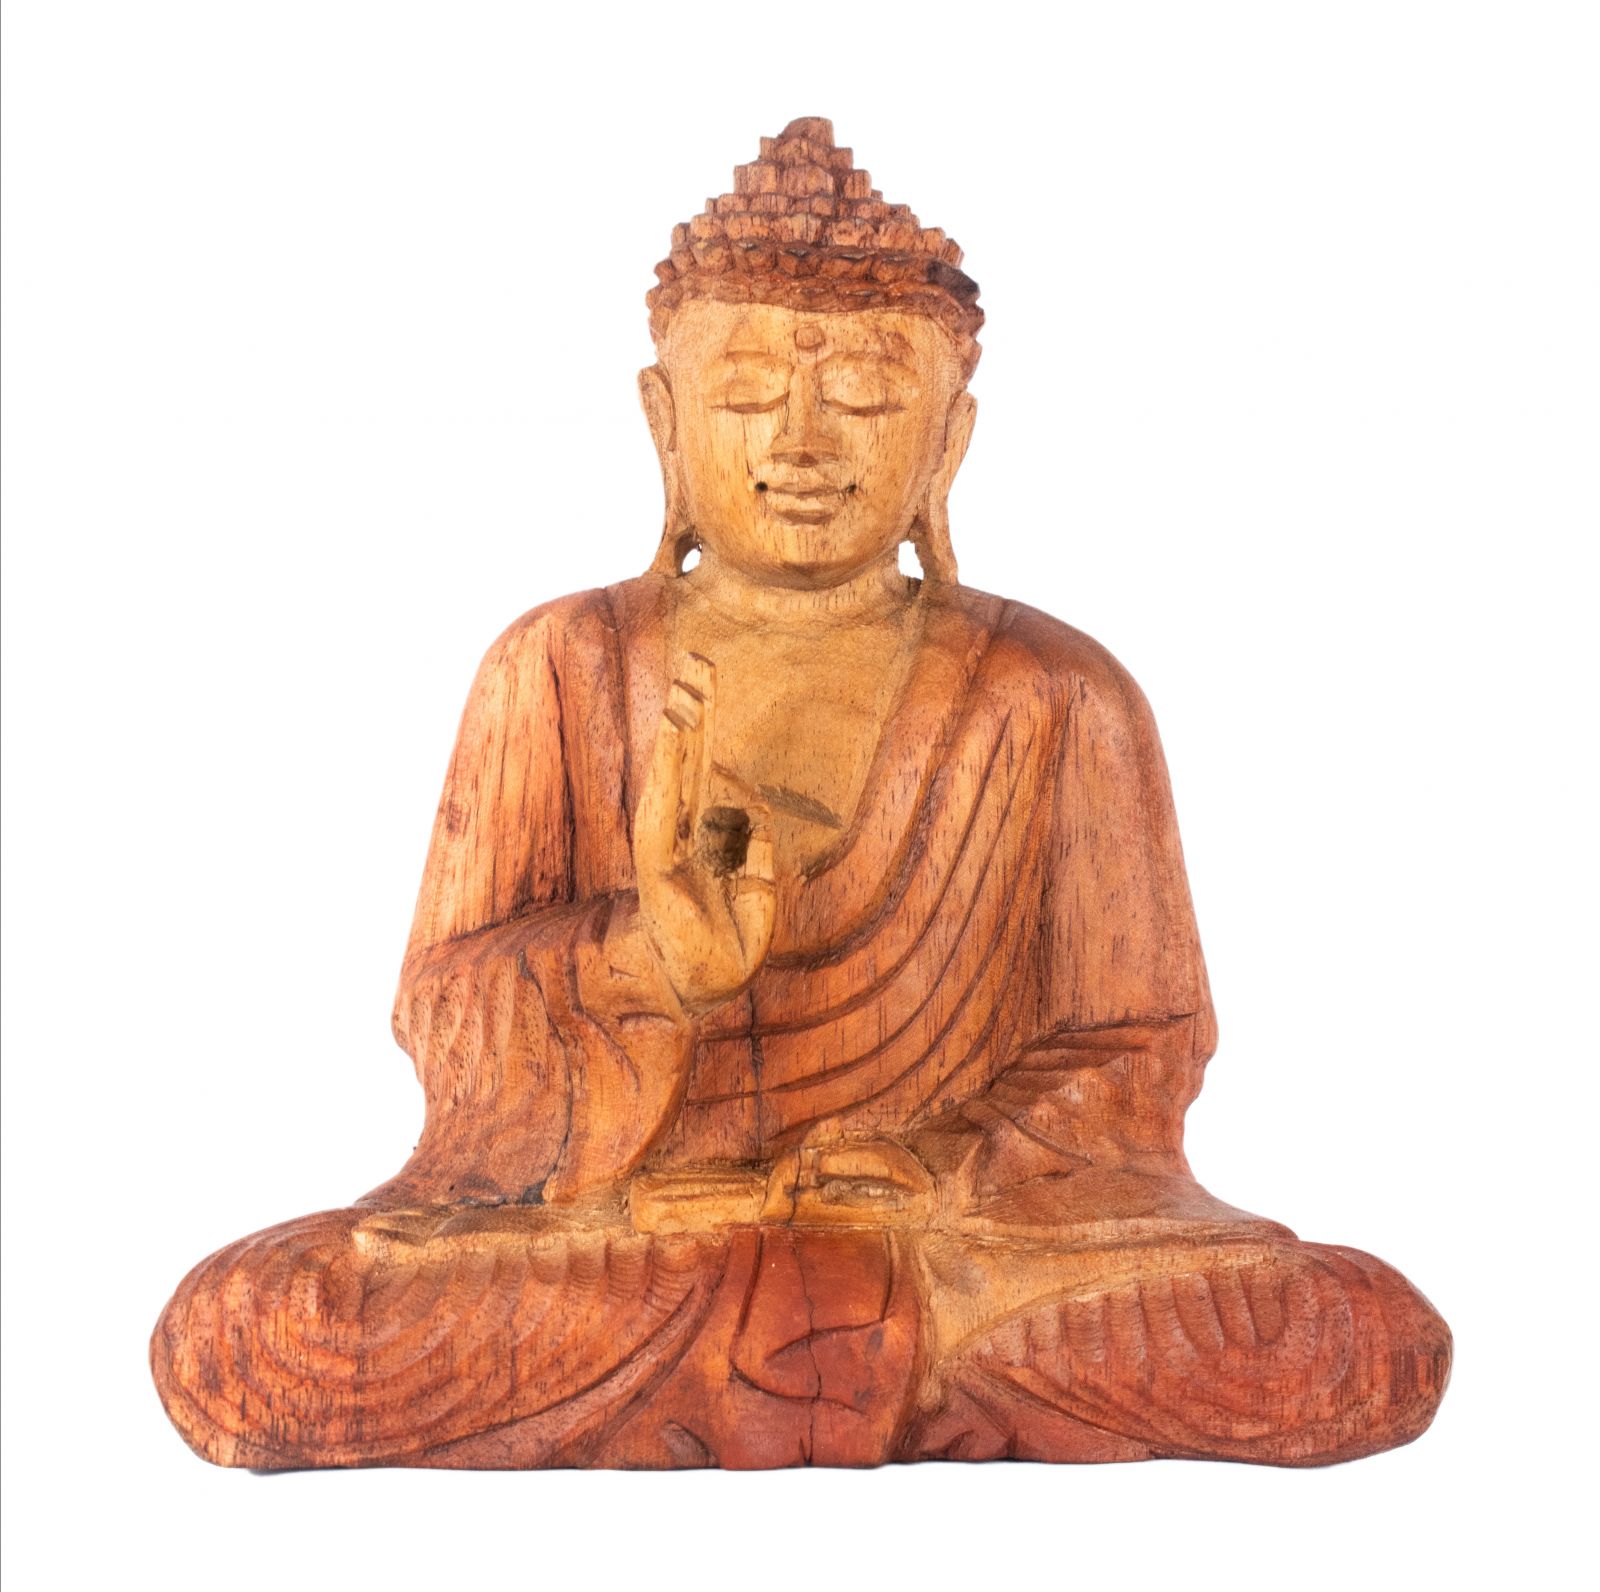 Carved wooden statue of Sitting Buddha 5 Indonesia